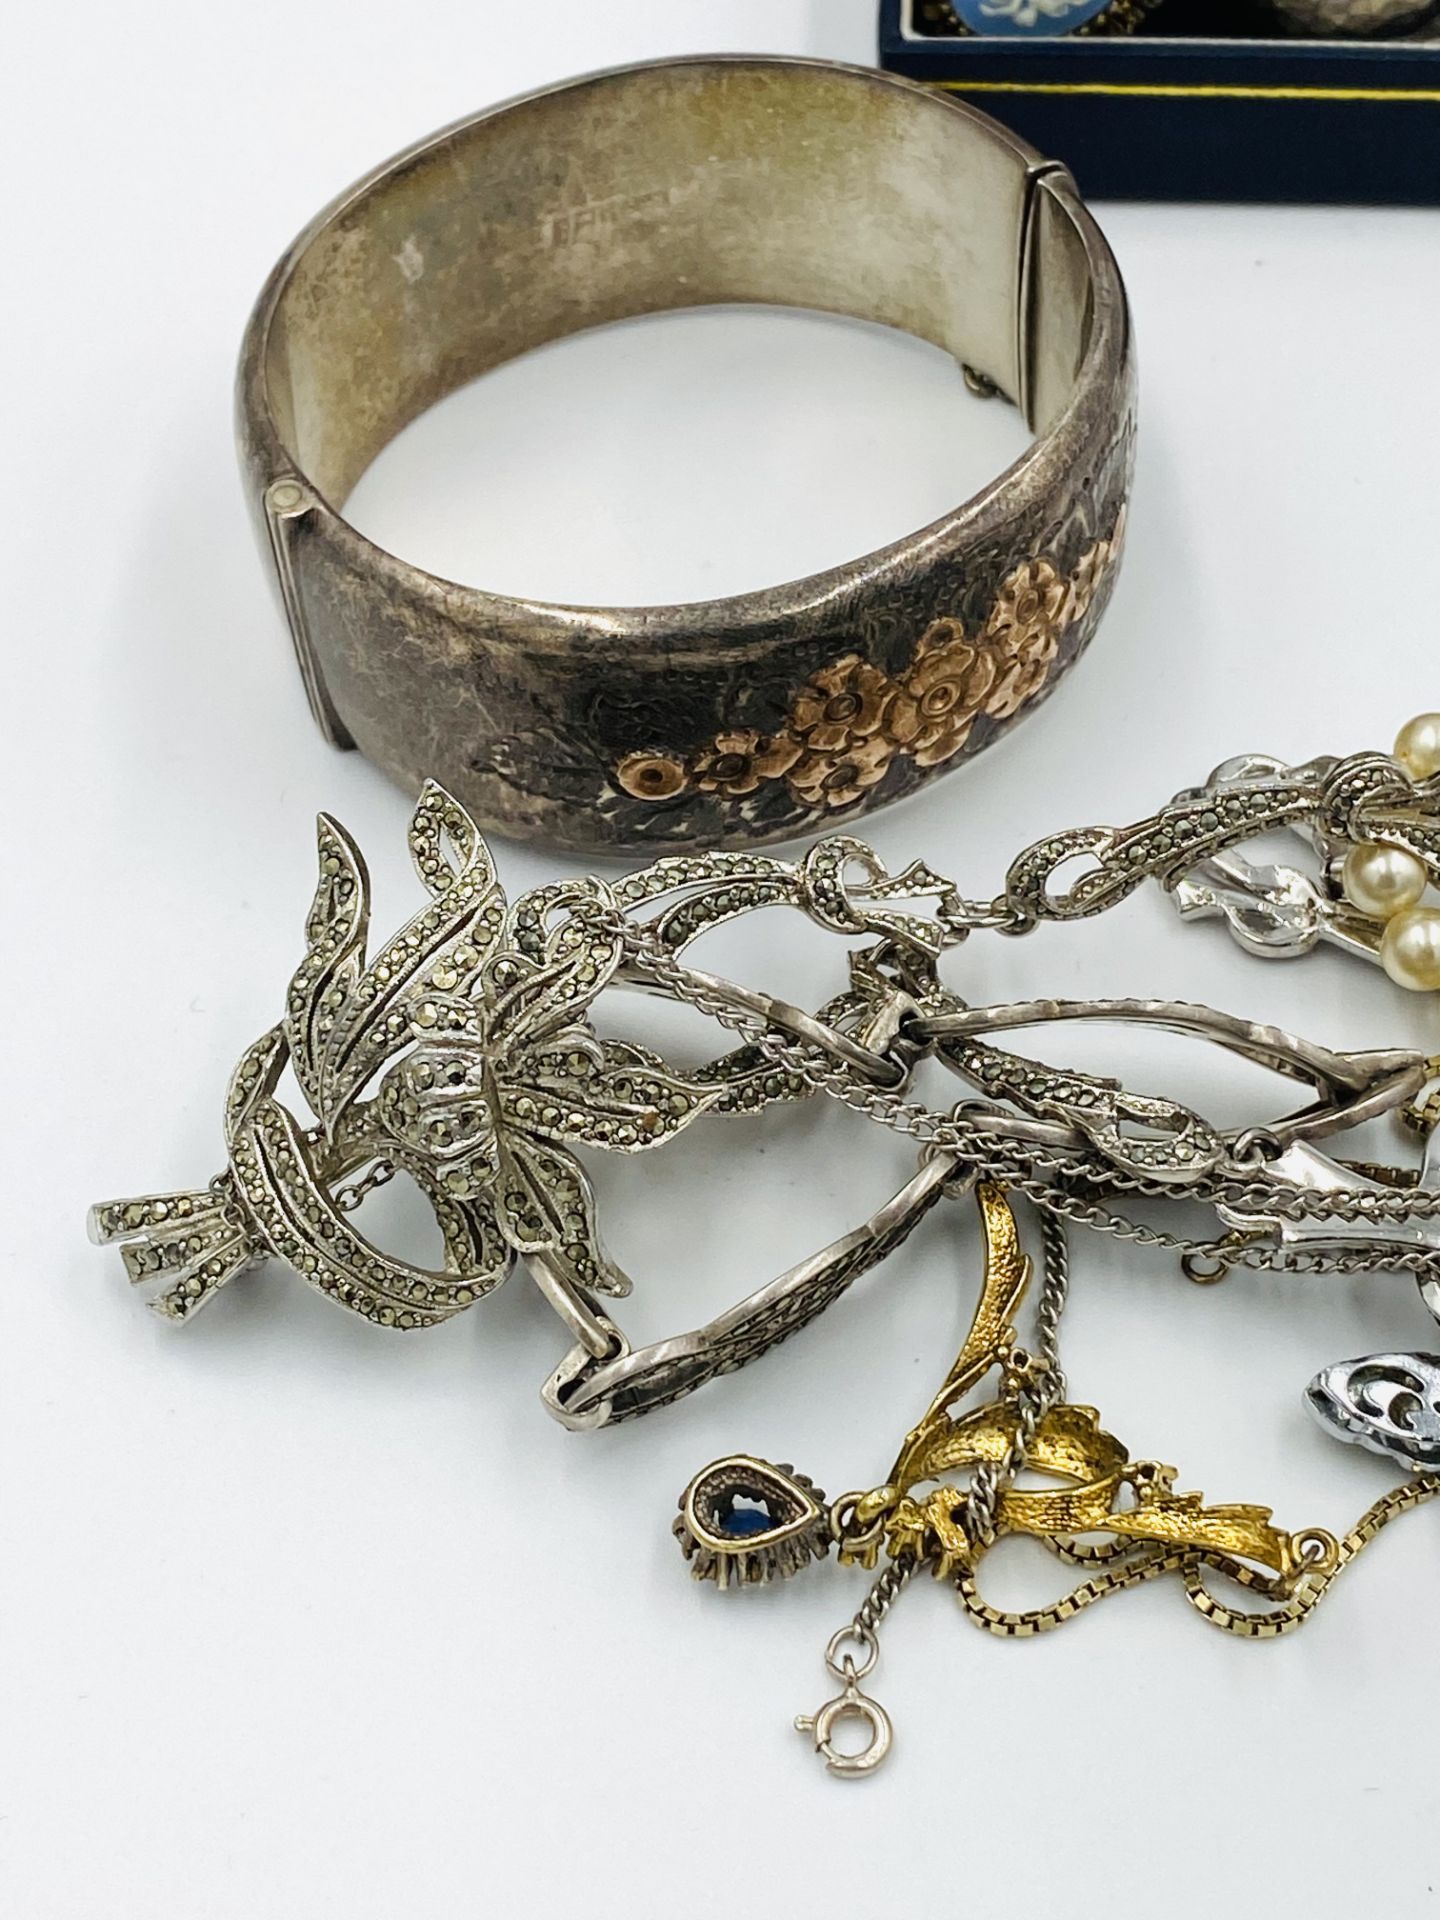 Sterling silver bracelet and other items of jewellery - Image 3 of 4